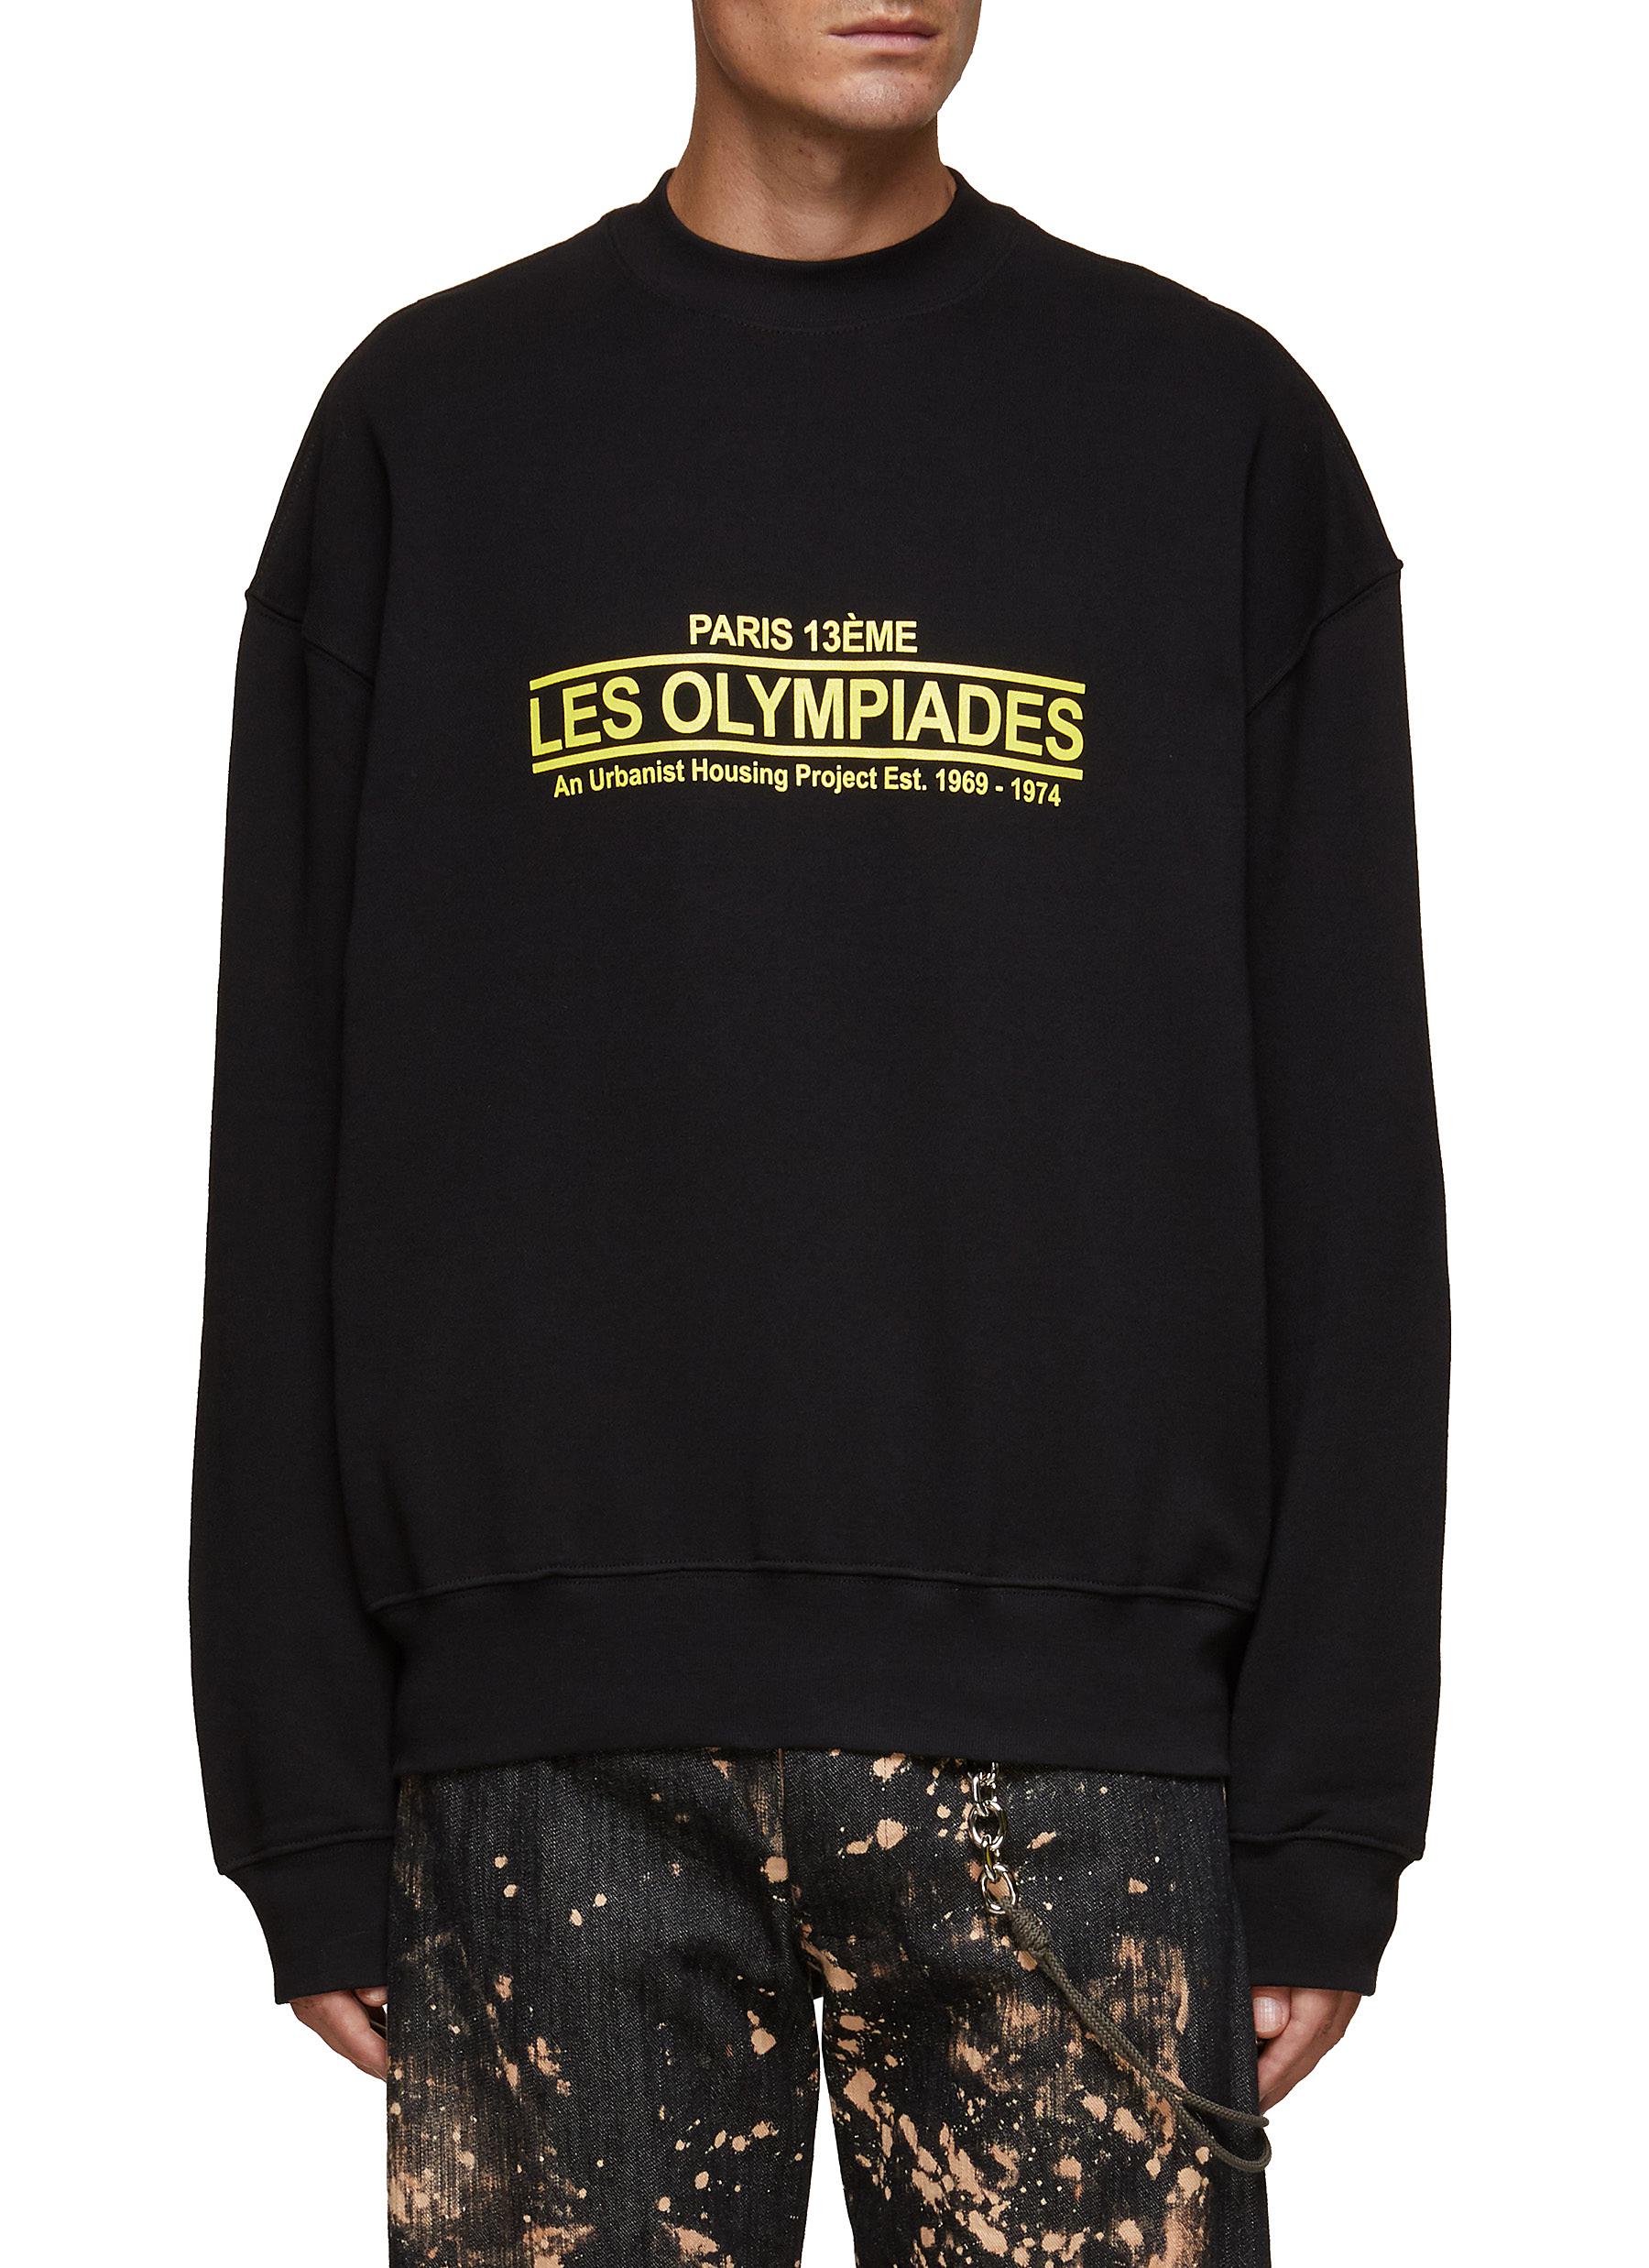 SONG FOR THE MUTE 'LES OLYMPIADES' PRINT GYM PULLOVER SWEATSHIRT